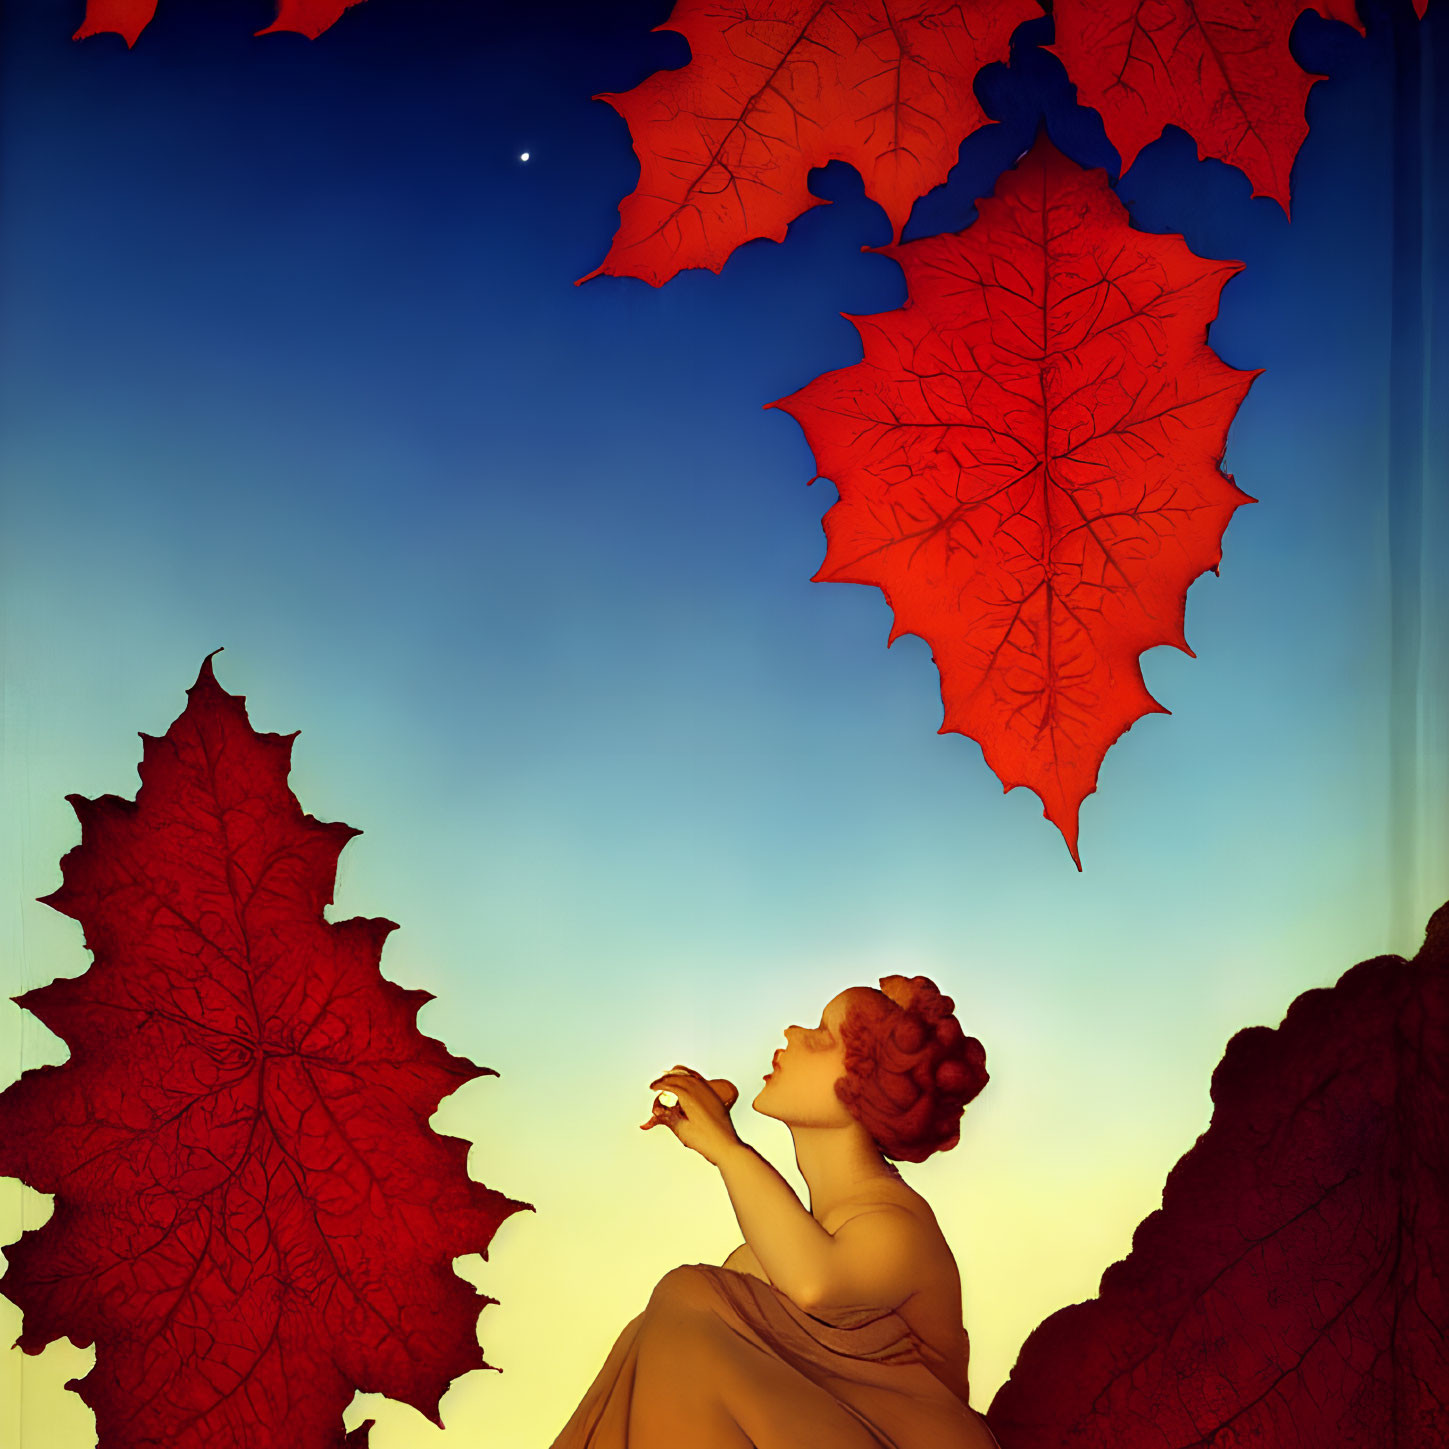 Woman in flowing dress gazes at sky transitioning from golden yellow to deep blue with red maple leaves.